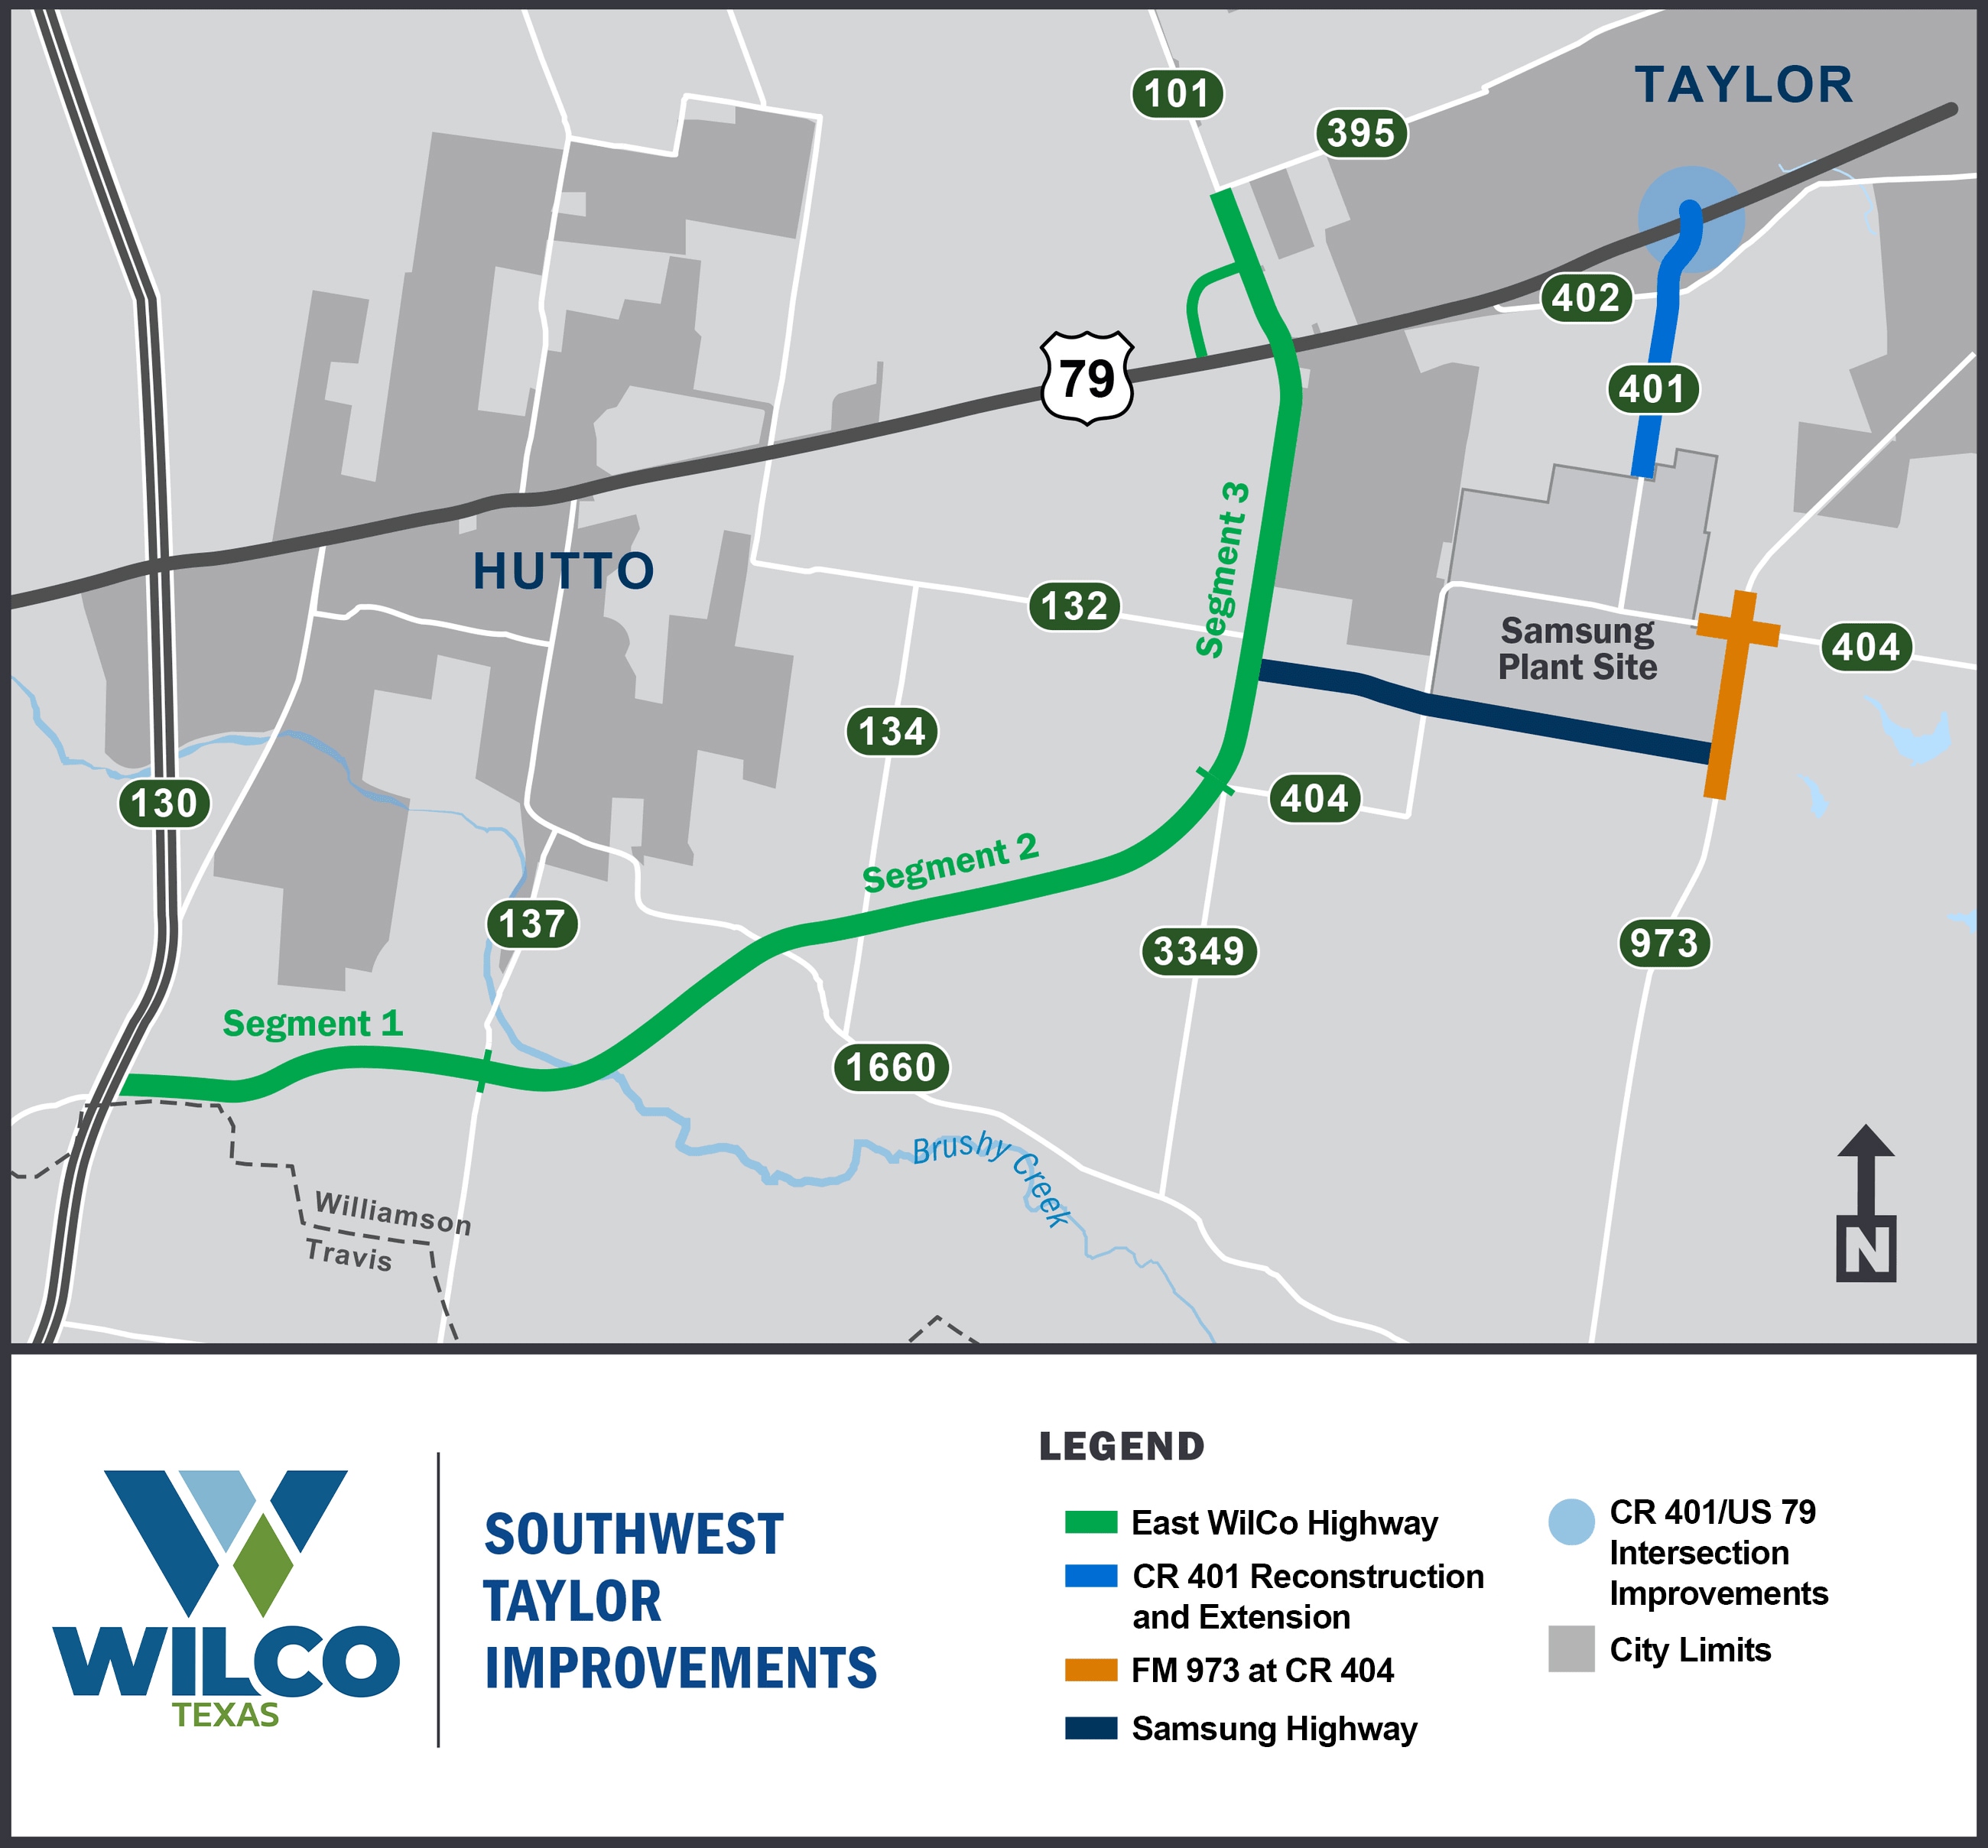 Map of the Southwest Taylor Improvements